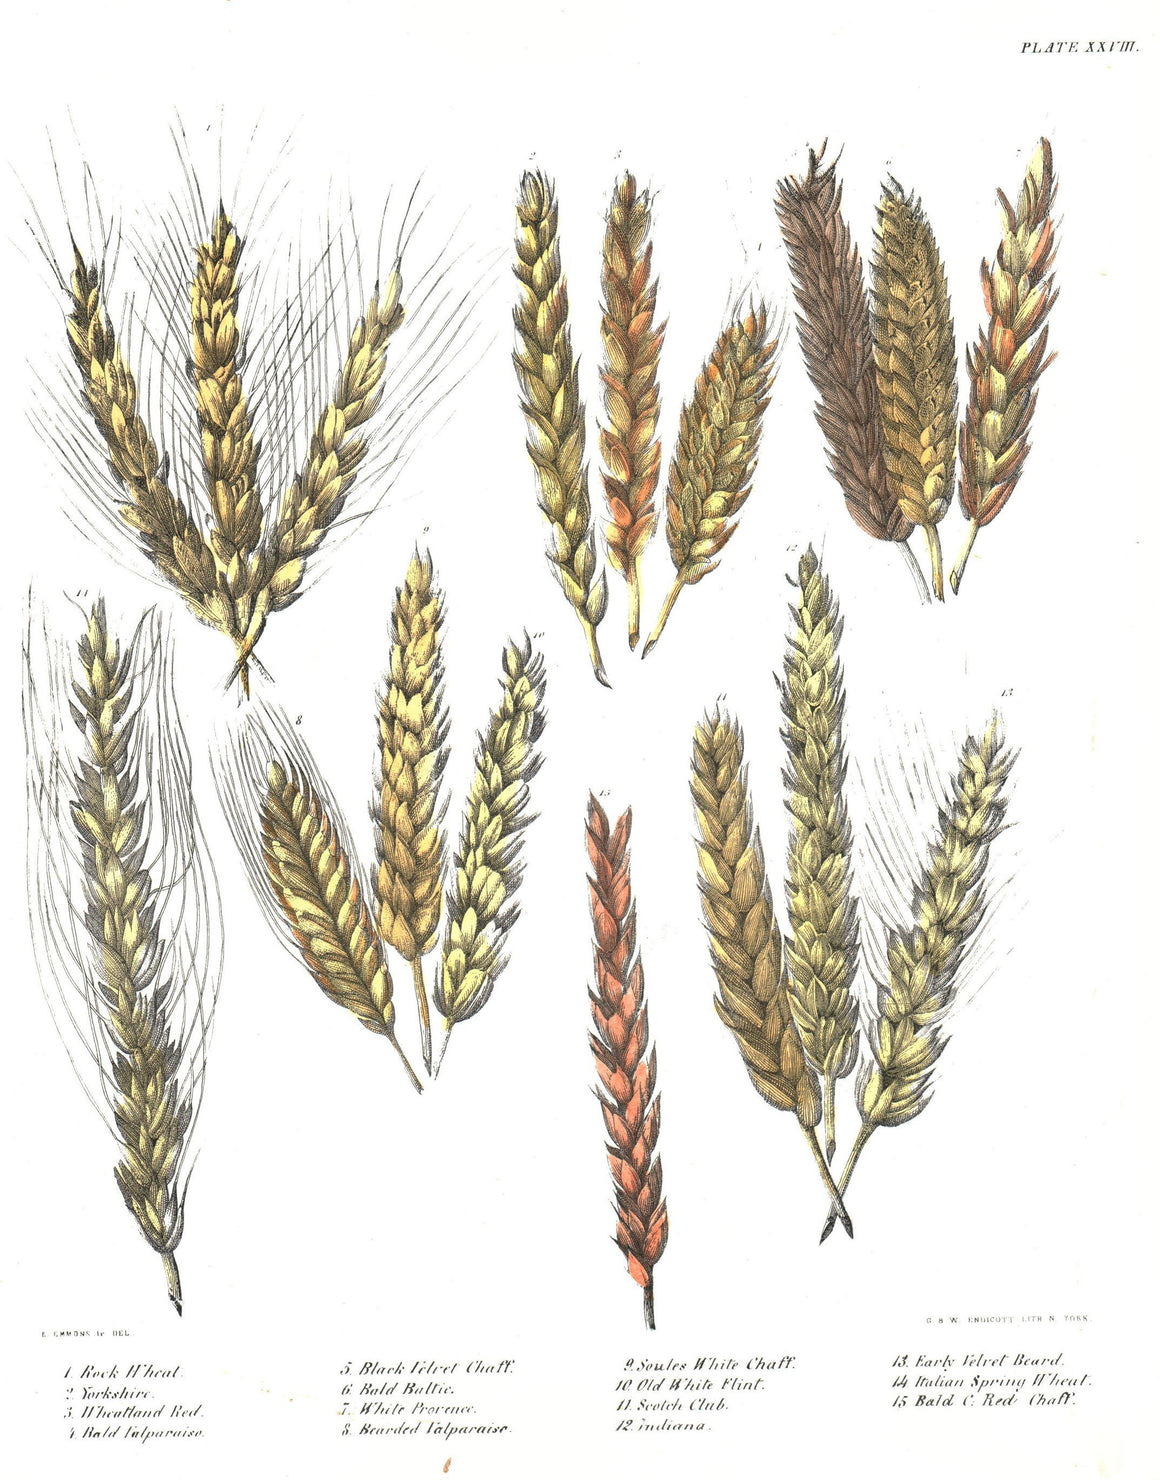 1849 Pl 28 15 Strains of Wheat - Emmons